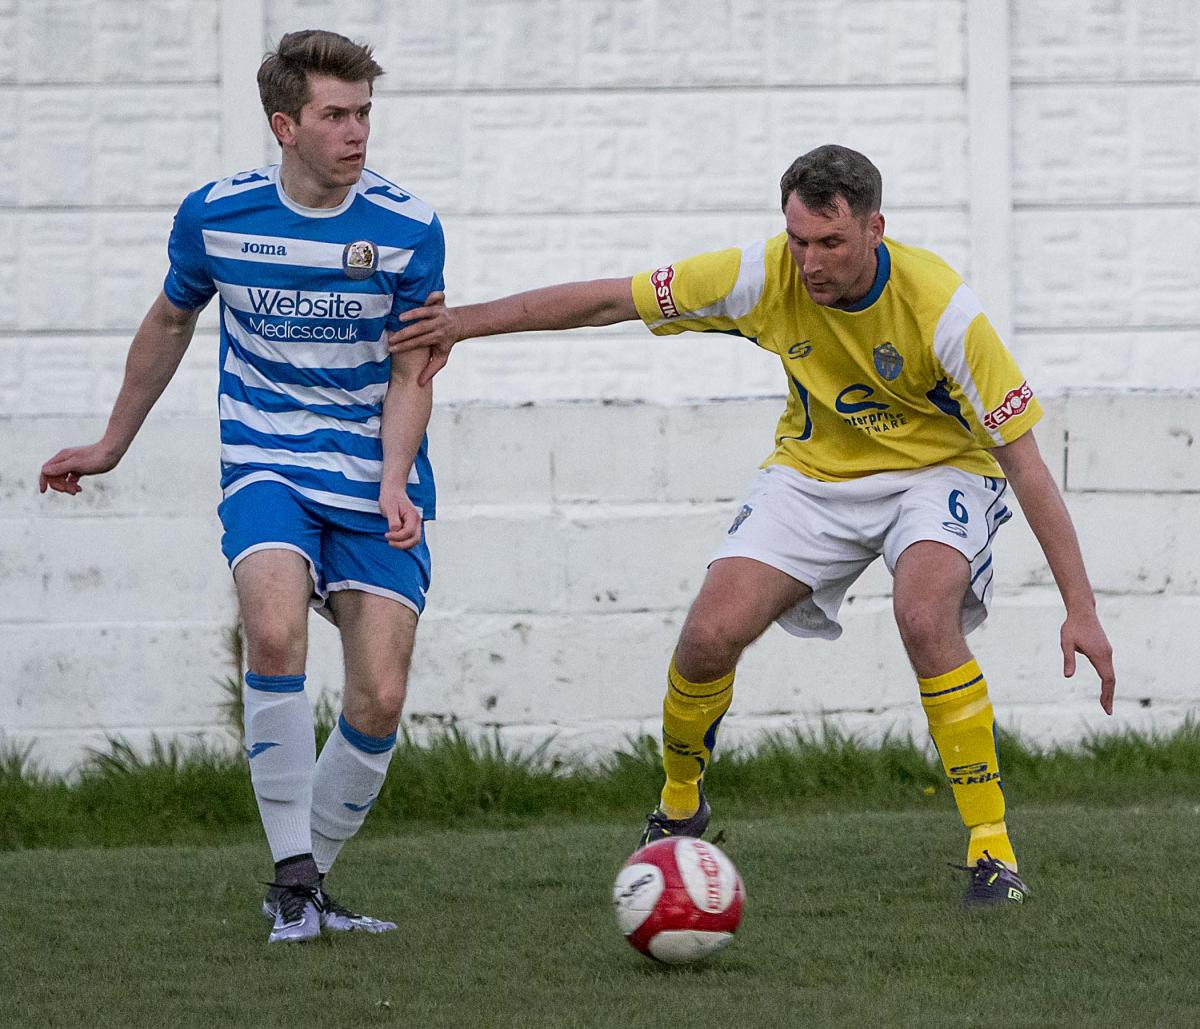 Action from Warrington Town's 3-1 win at Radcliffe Borough. Pictures by John Hopkins